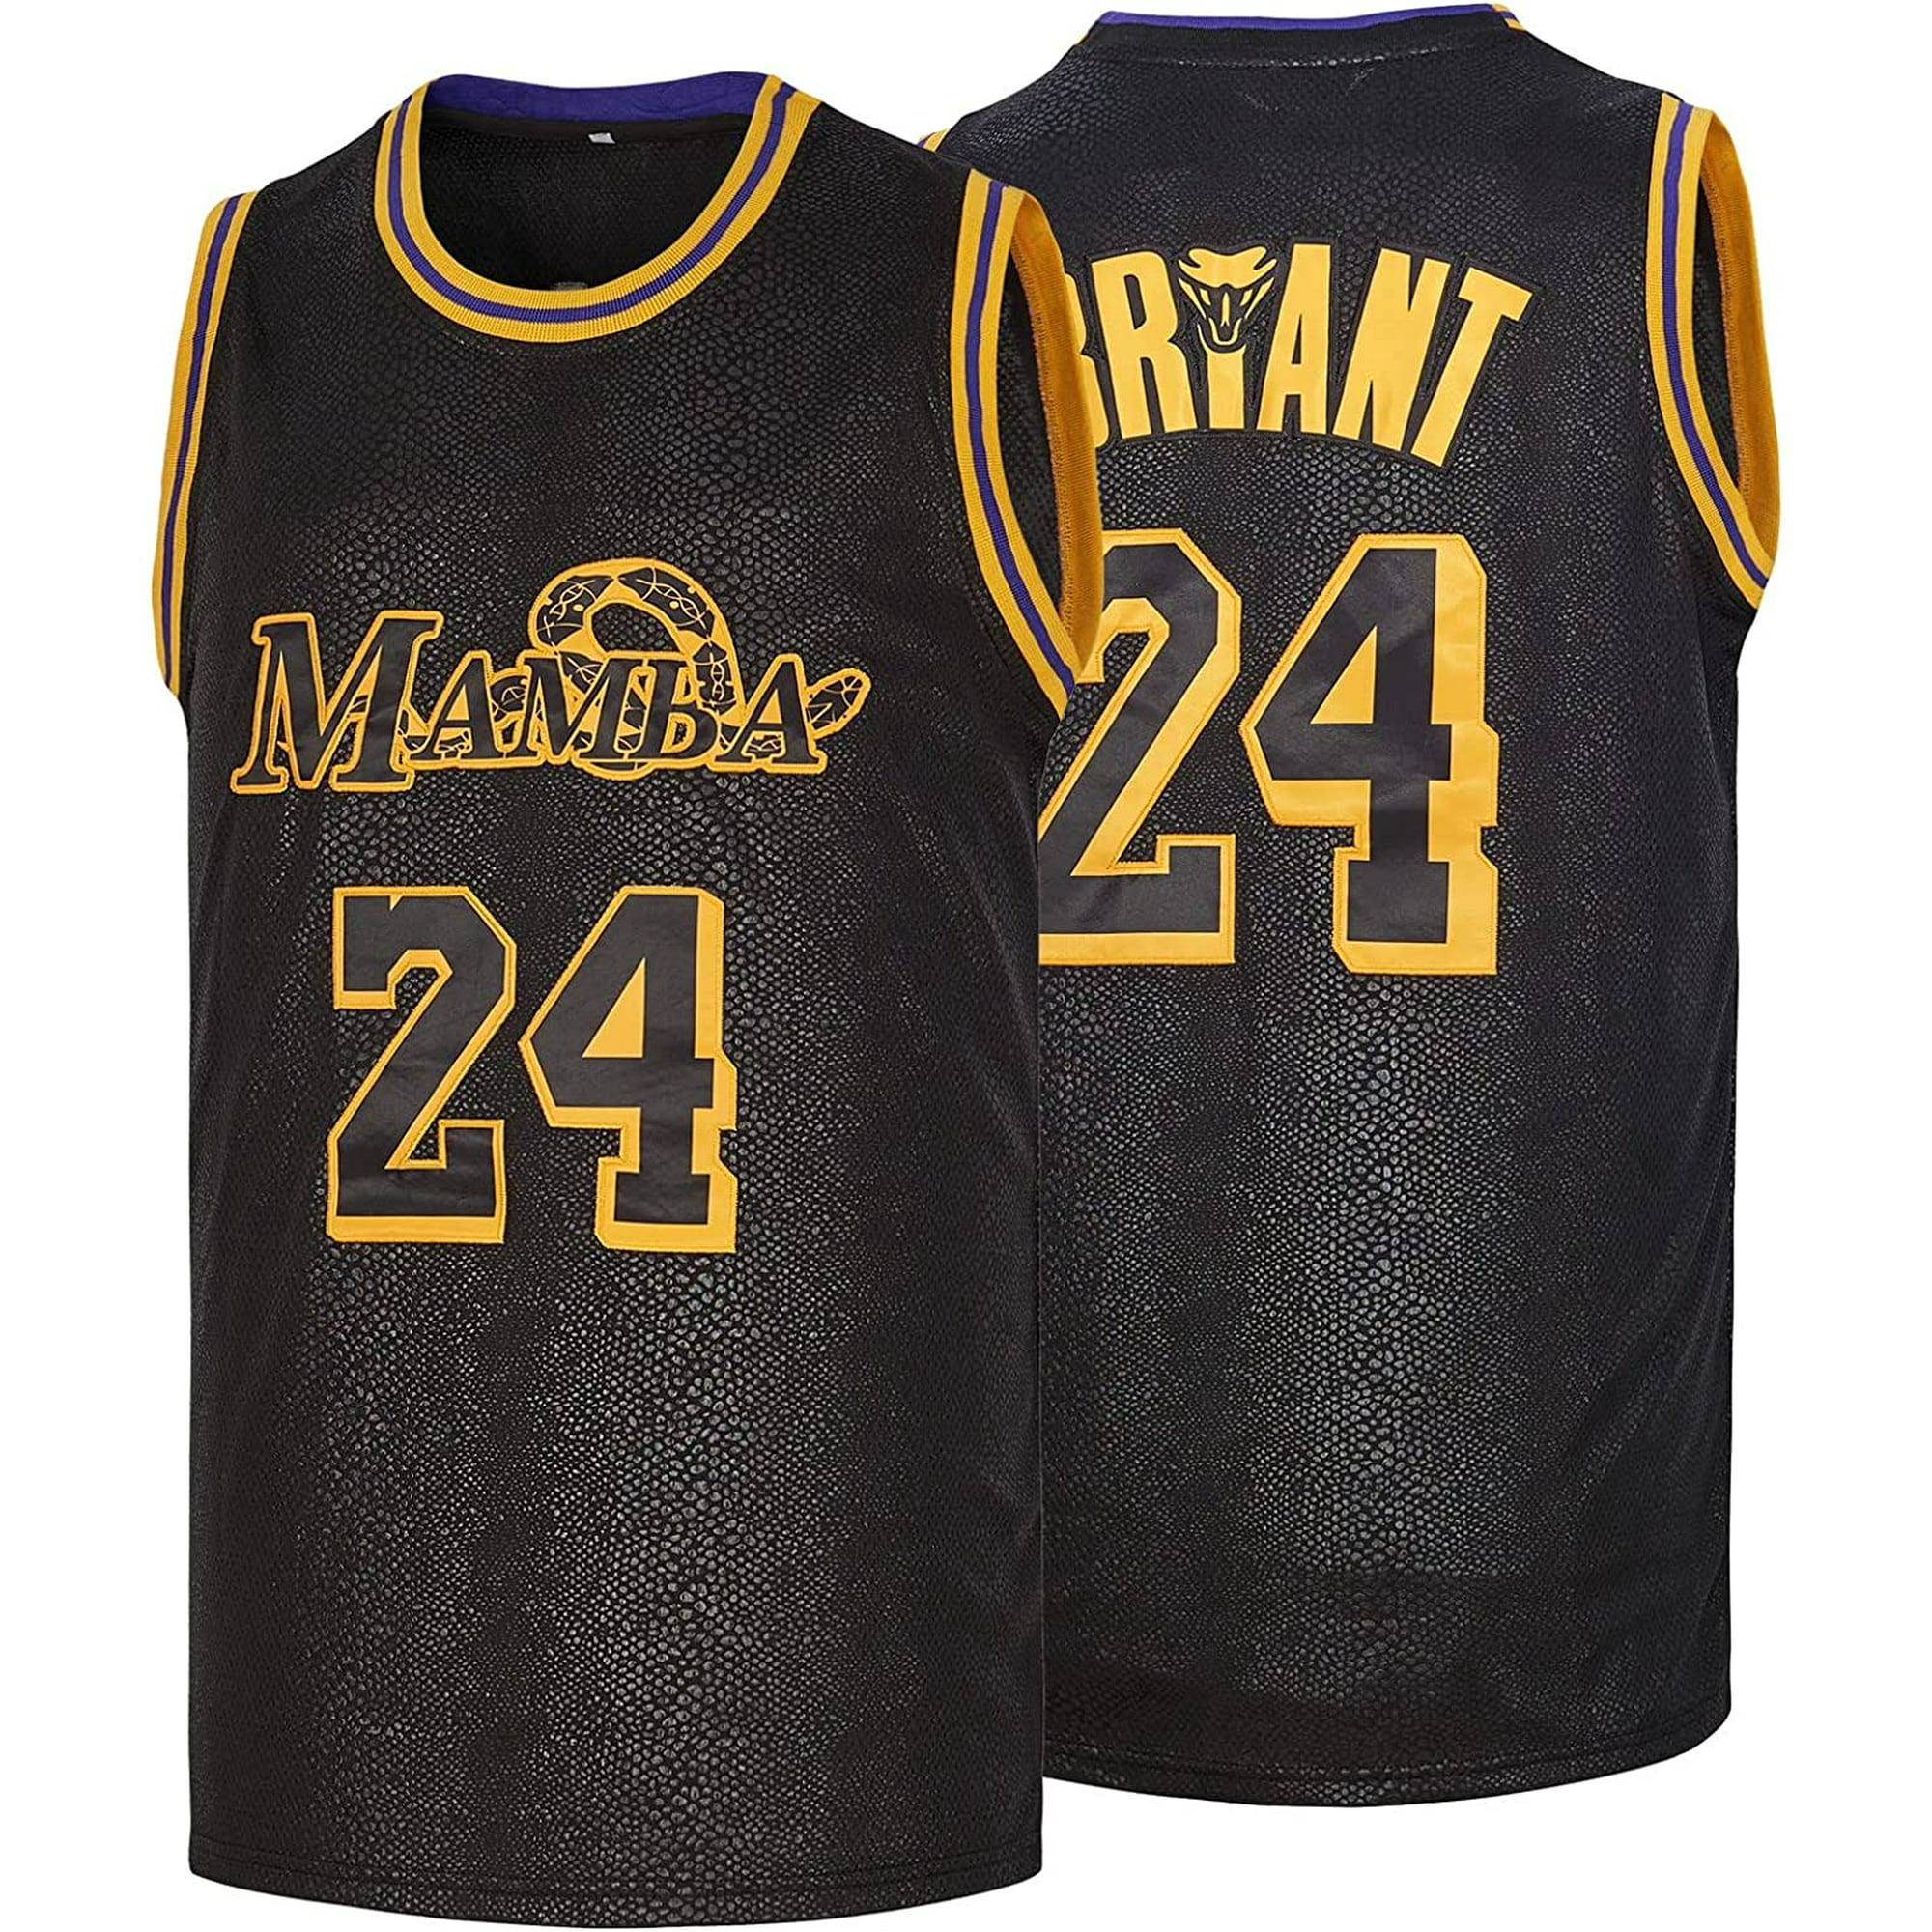 Youth #24 Mamba Jersey Kids #8 Basketball Jersey Hip Hop Clothing for Party  Large (8)